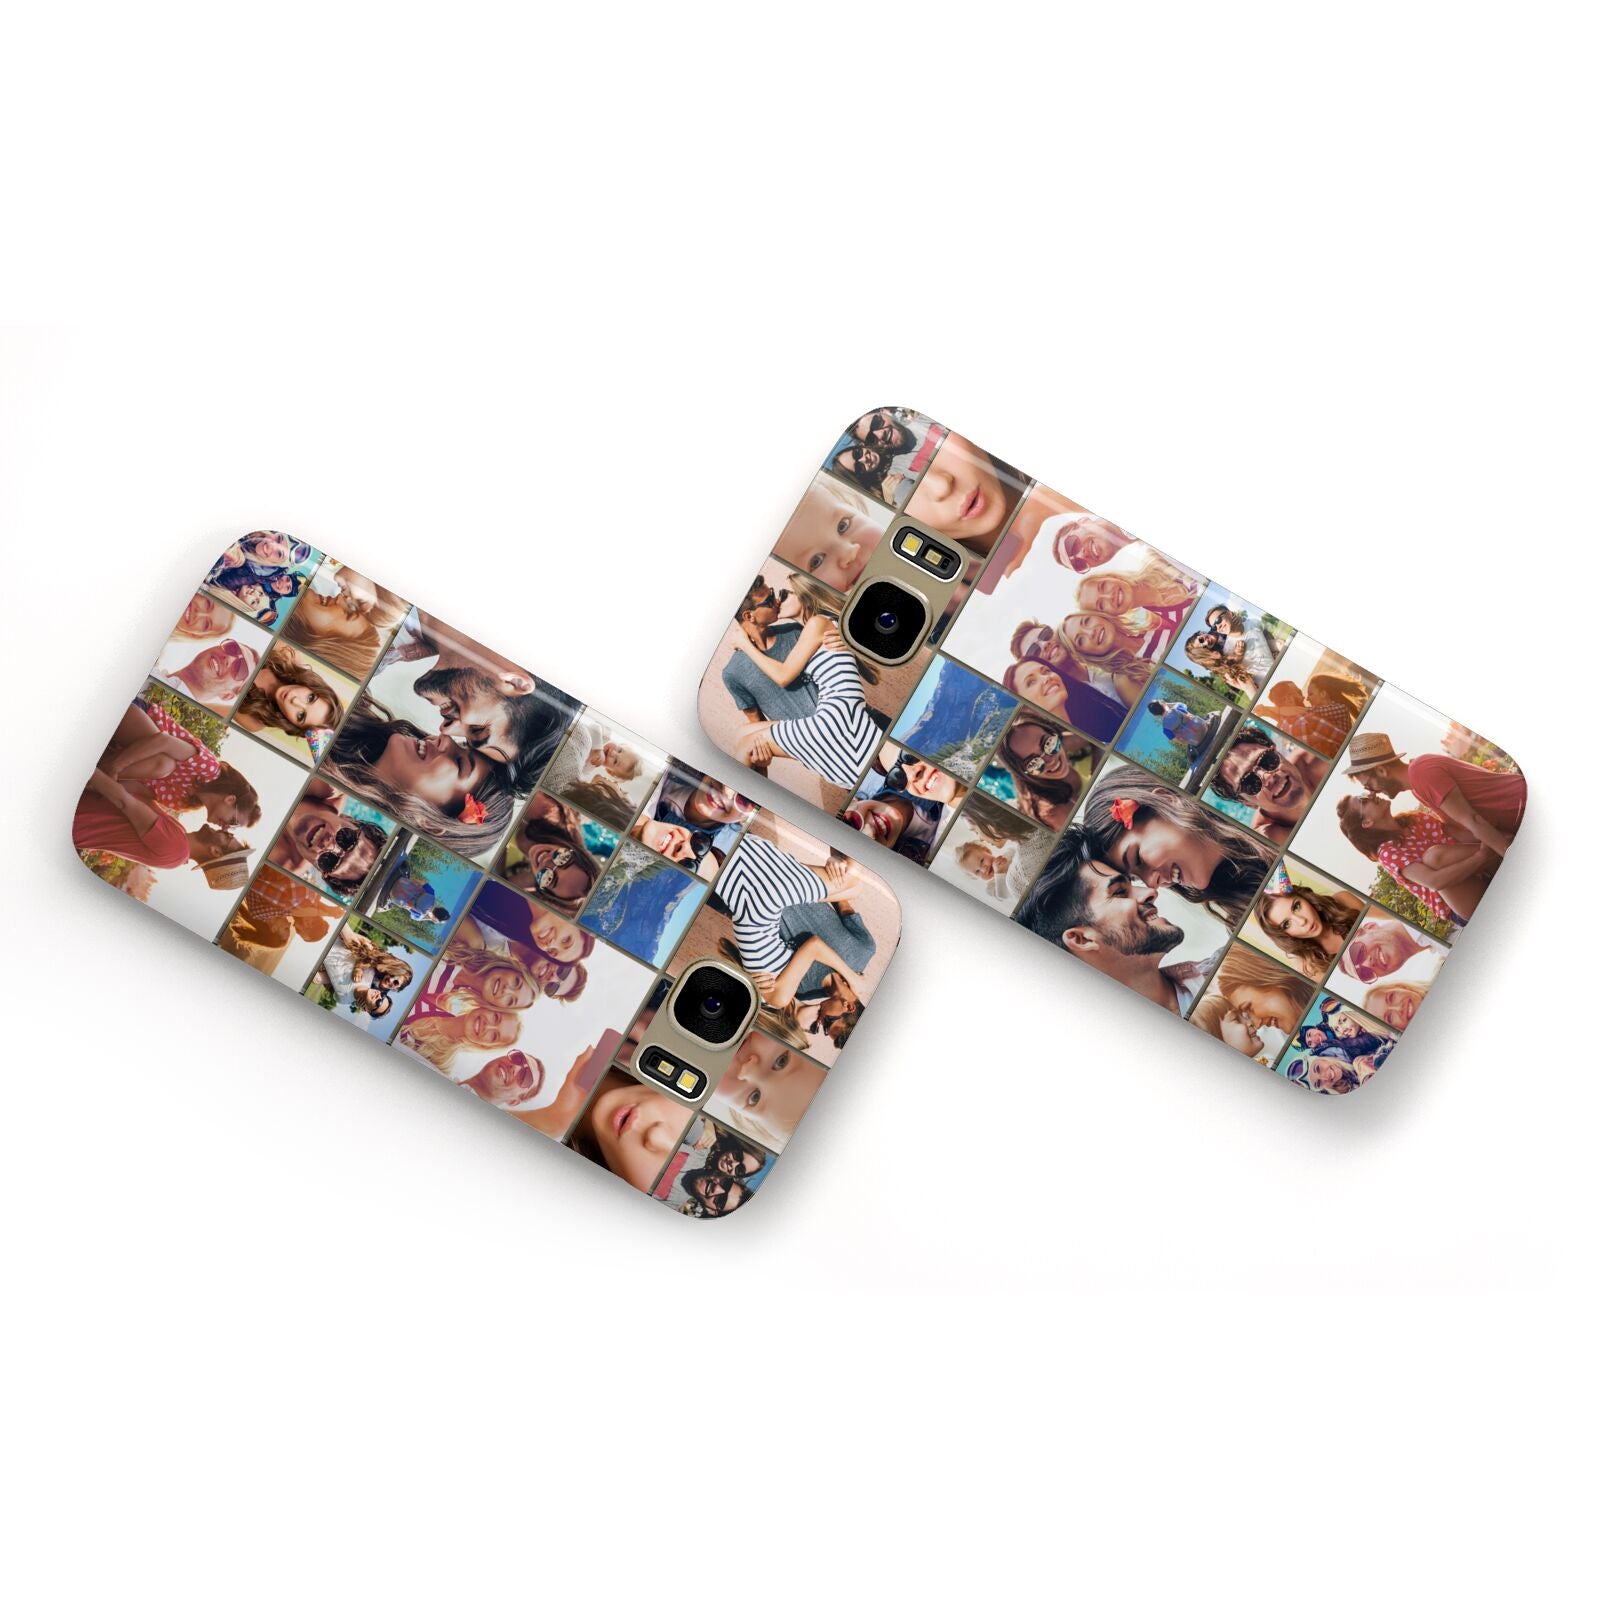 Photo Grid Samsung Galaxy Case Flat Overview